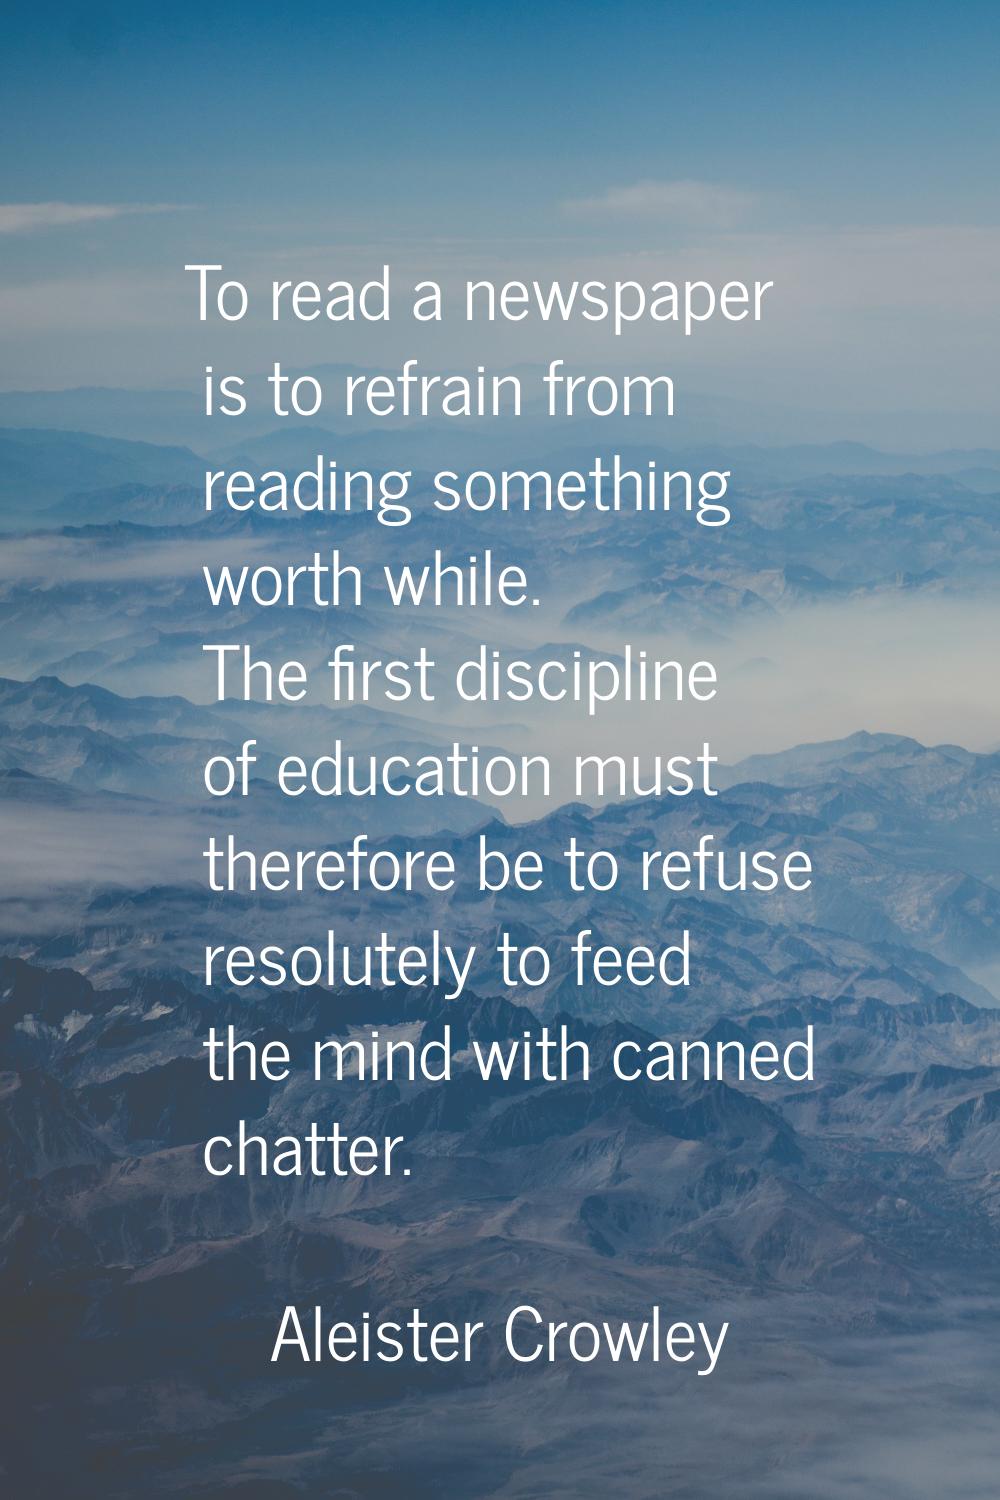 To read a newspaper is to refrain from reading something worth while. The first discipline of educa